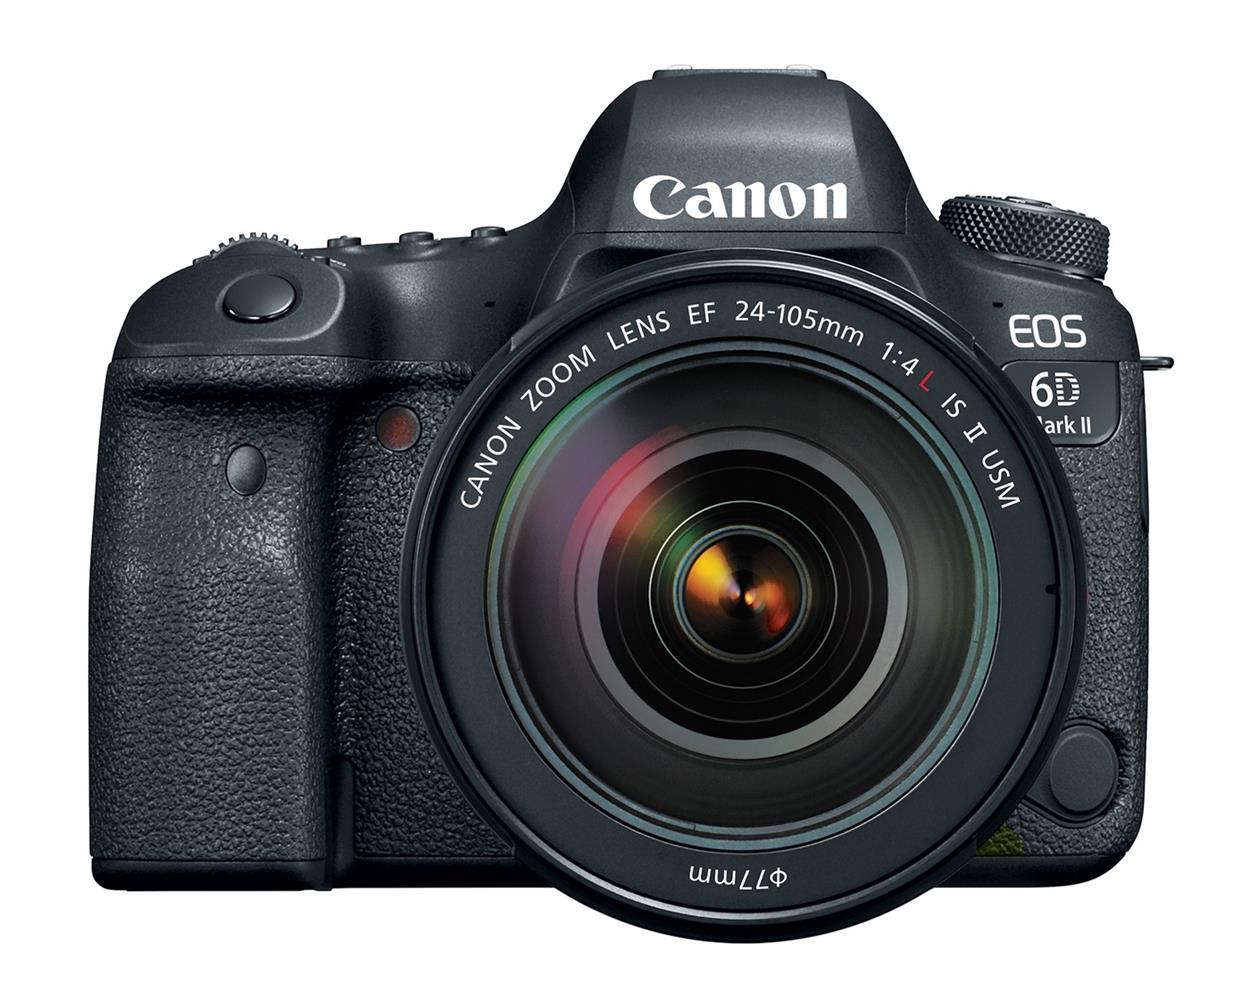 Canon EOS 6D Mark II DSLR Camera with 24-105mm f/4L II Lens (KIT